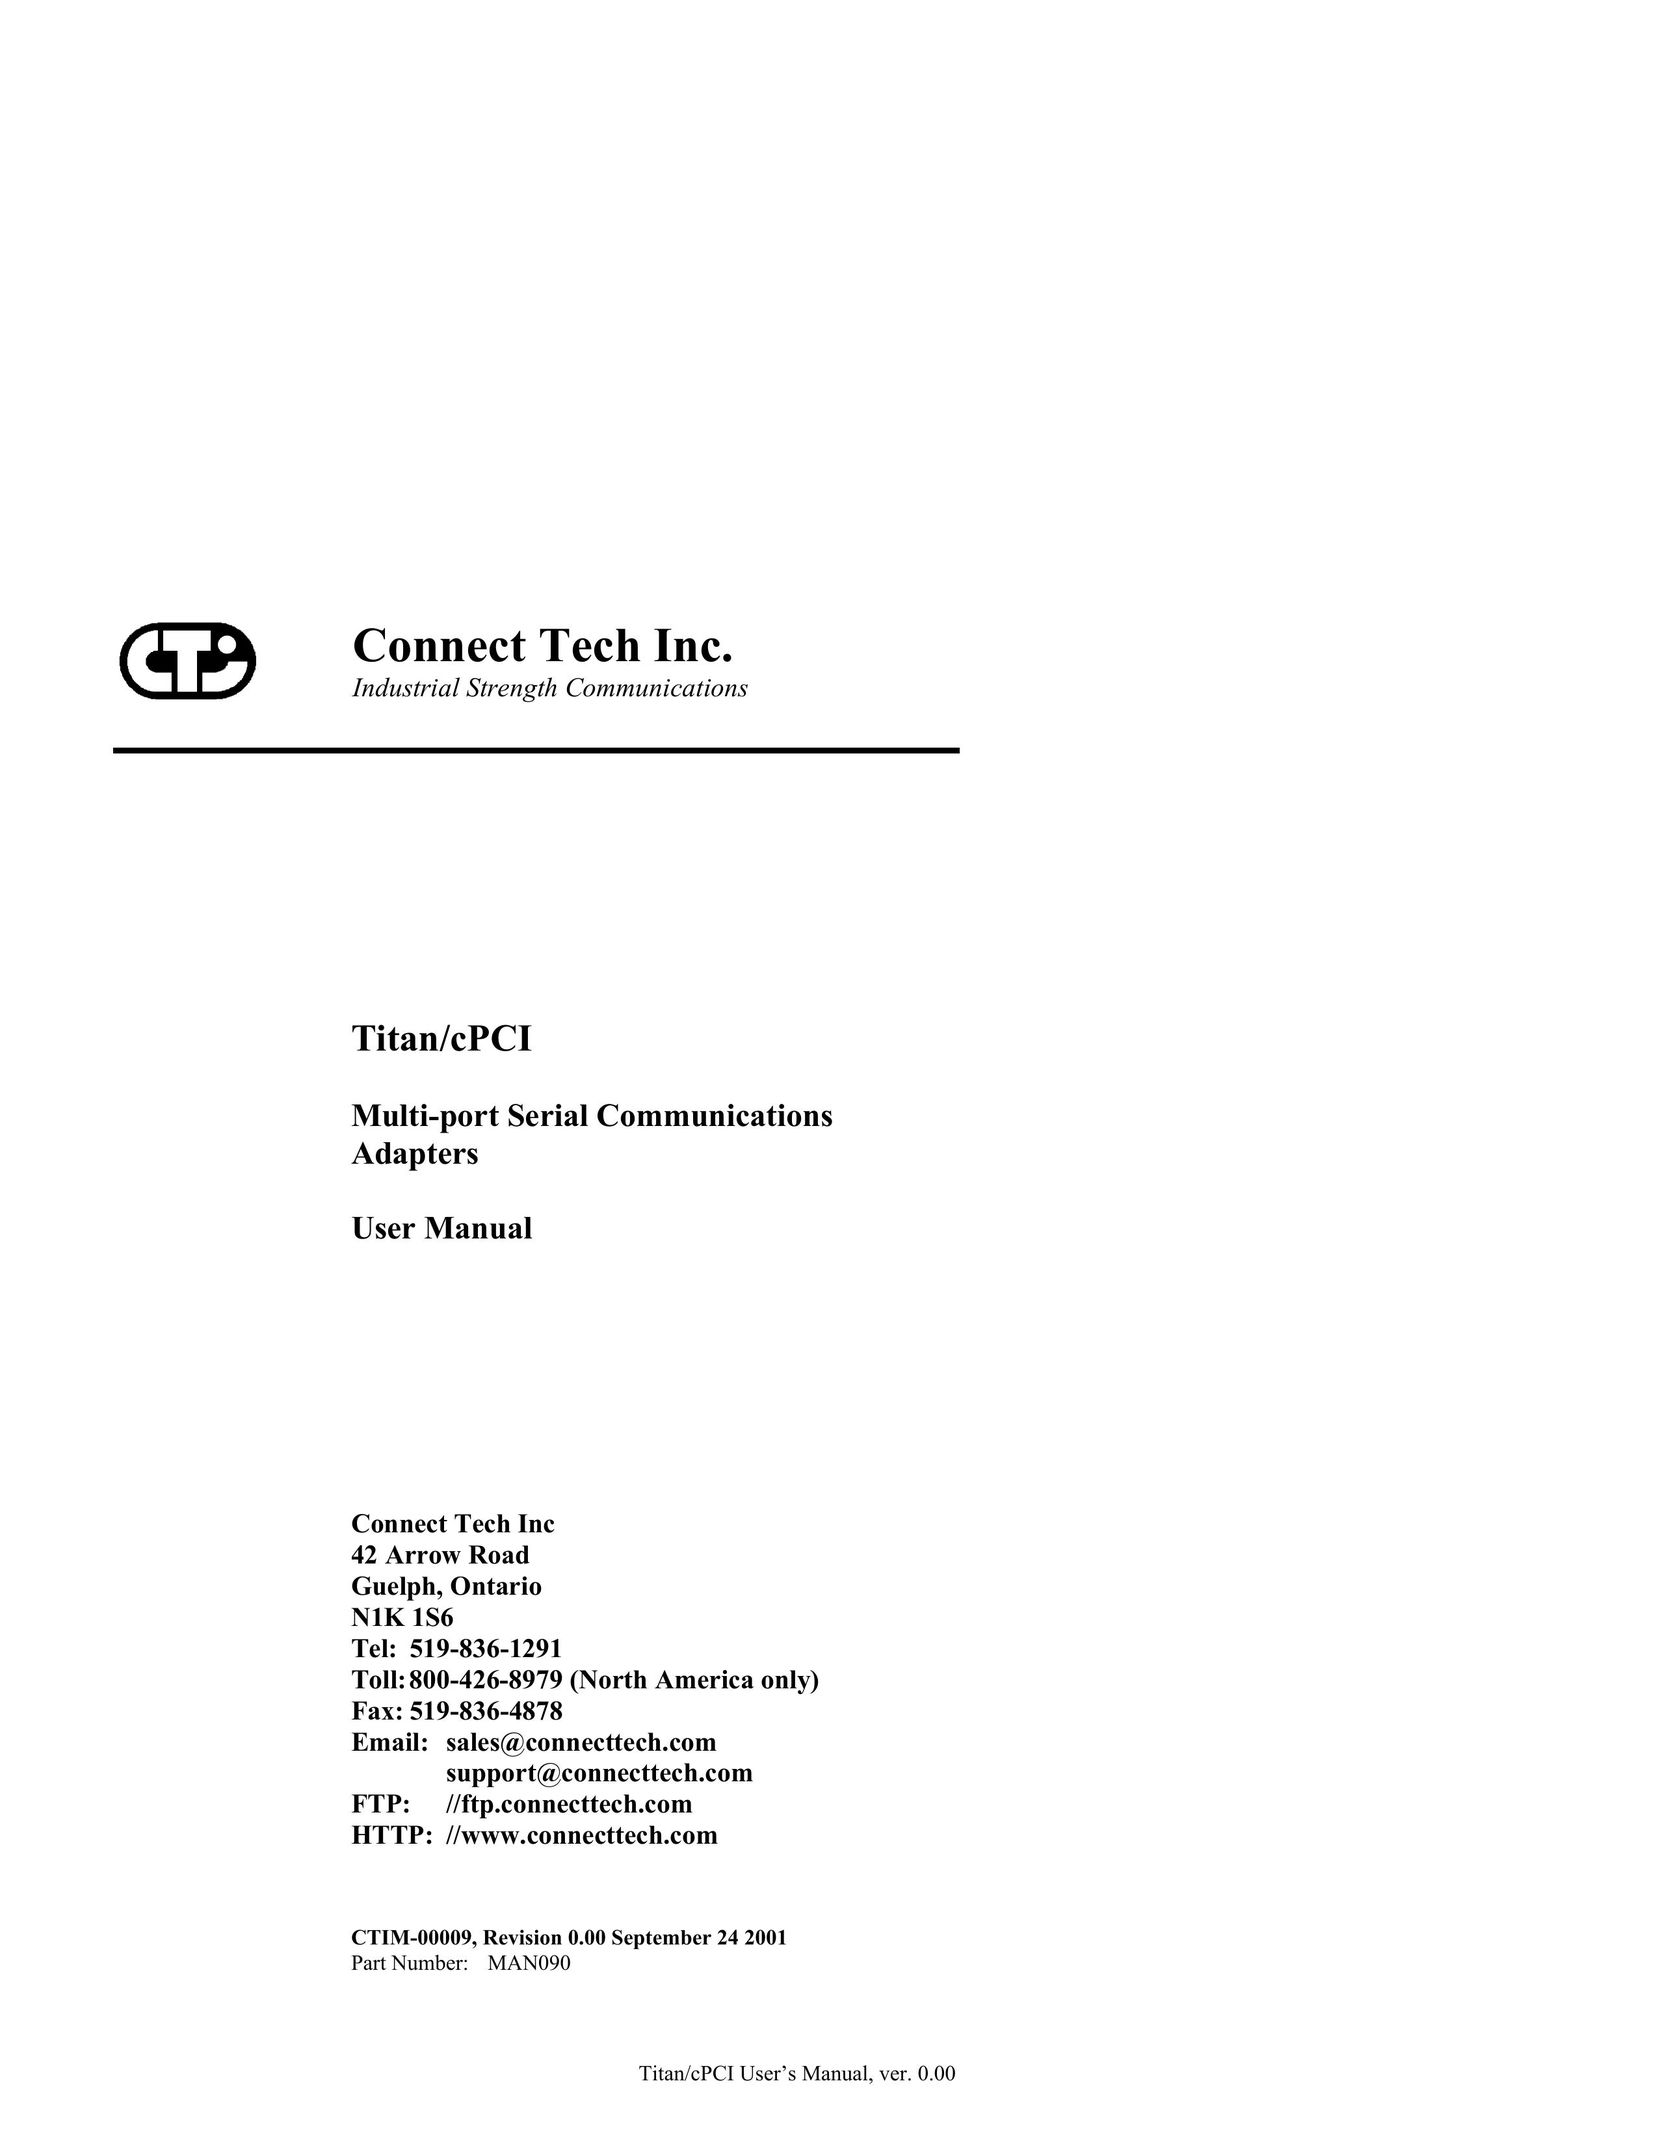 Connect Tech JB1 Network Card User Manual